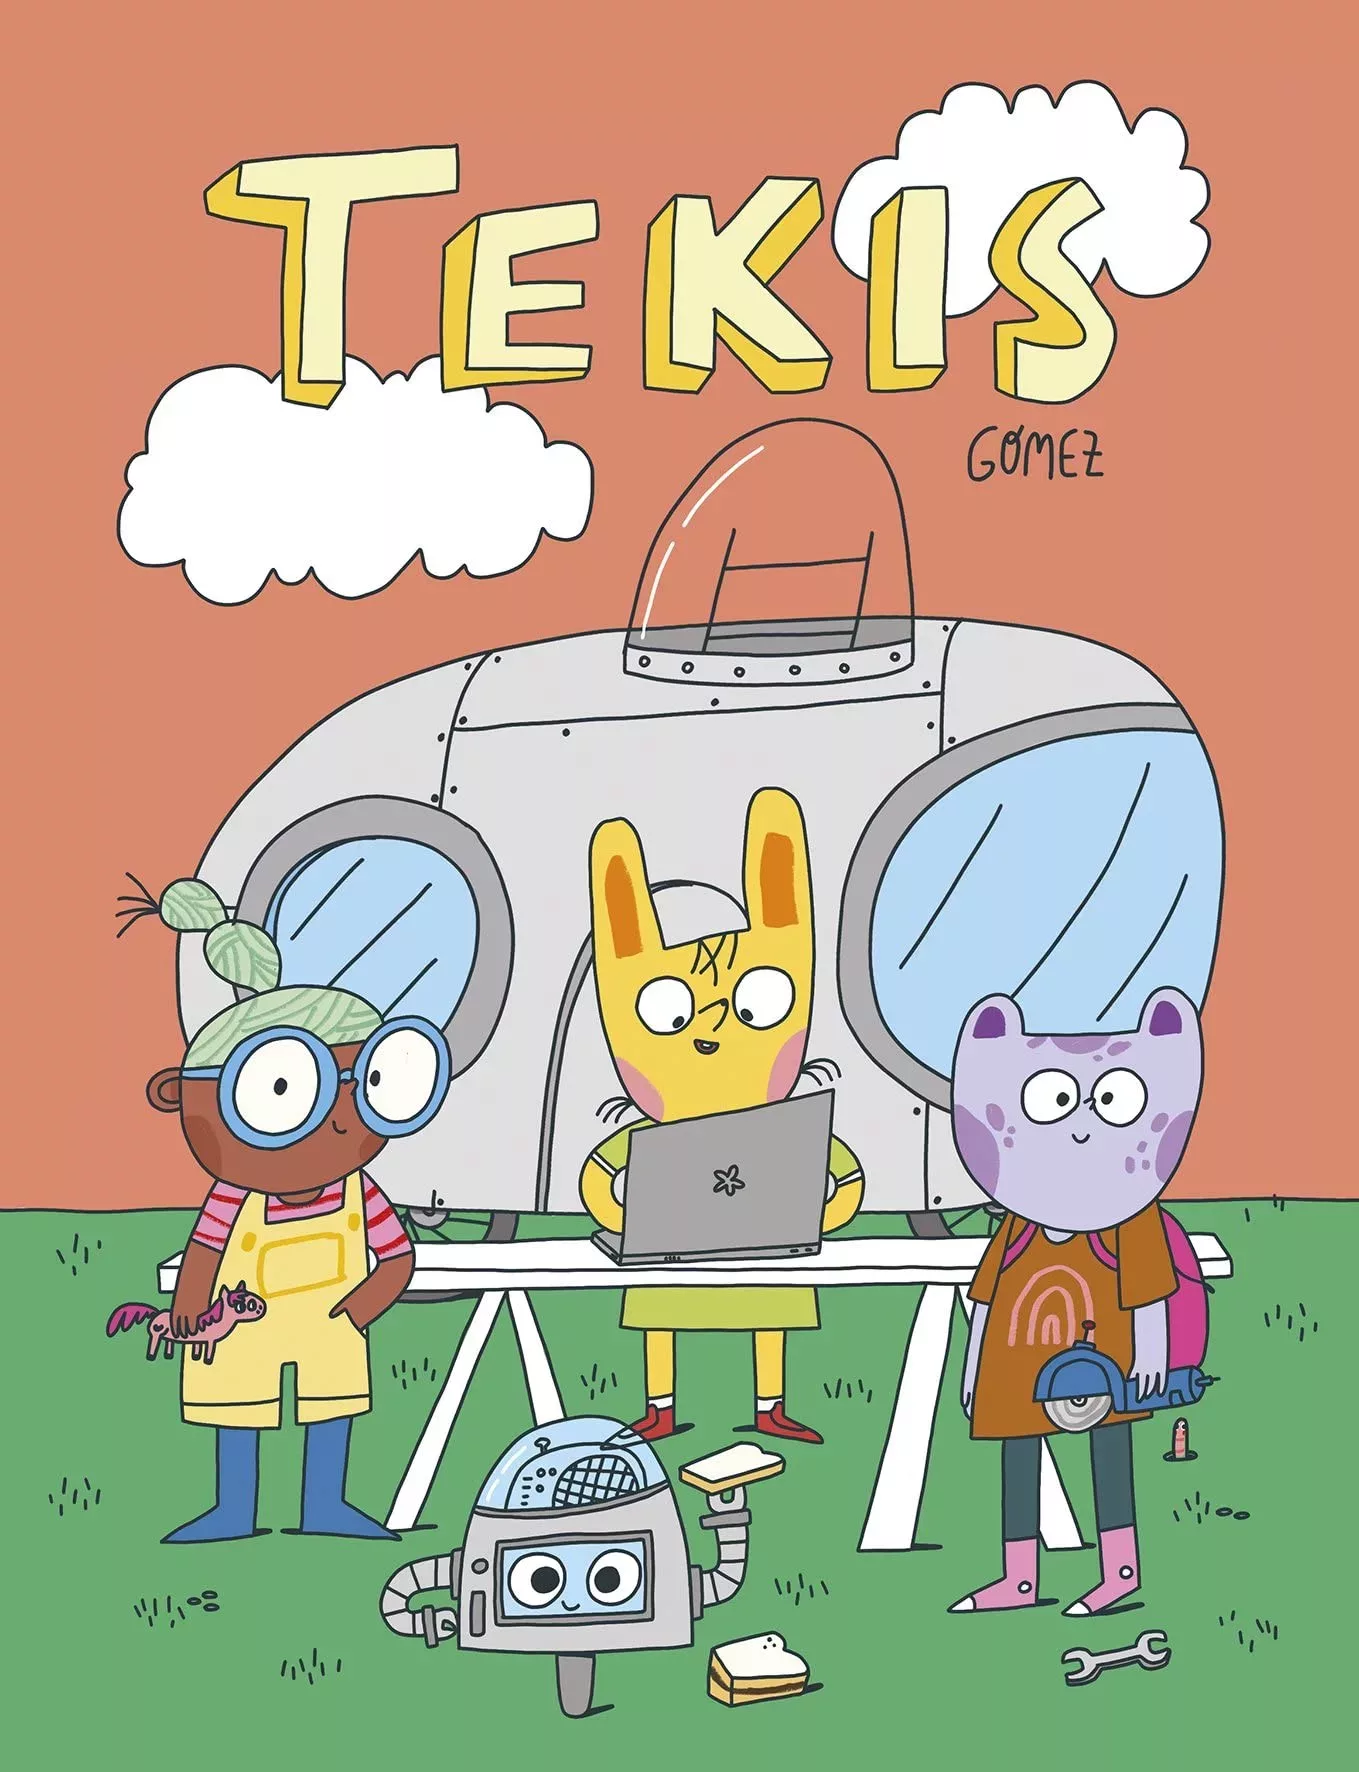 Cover of Tekis